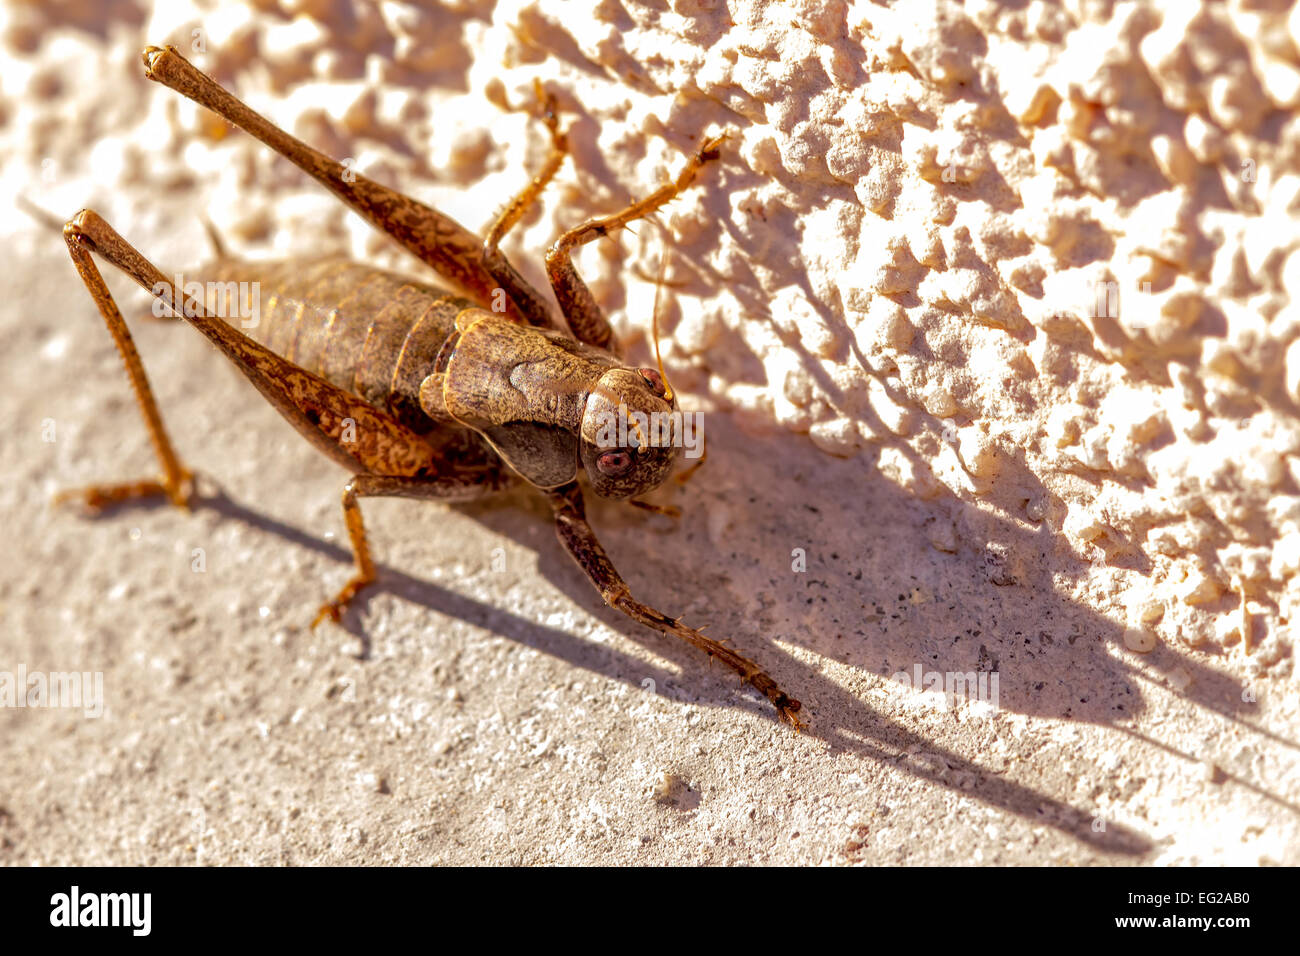 A cricket on a sunny wall with nice shadow ready to jump. Stock Photo